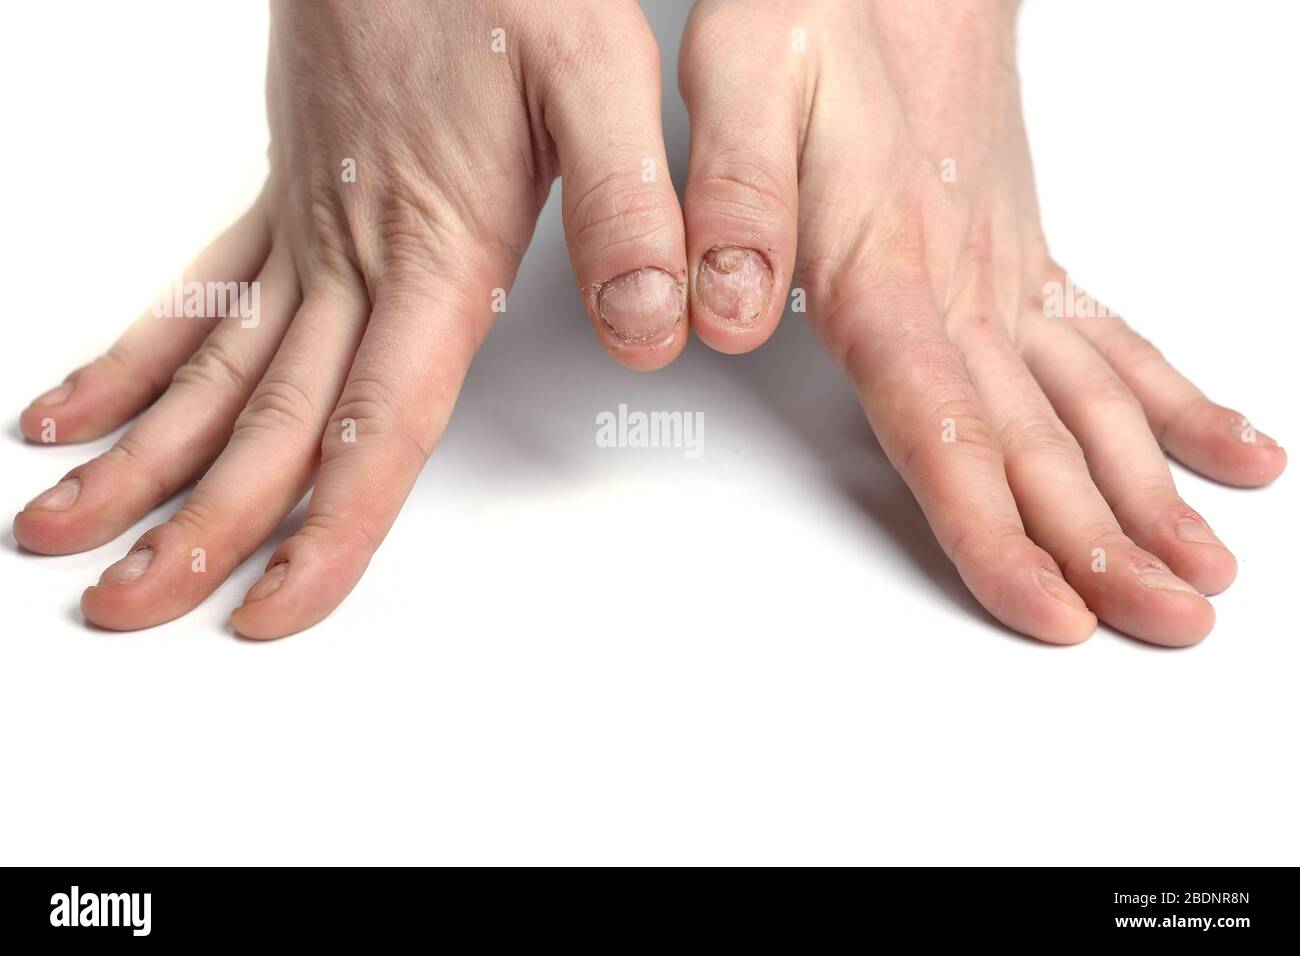 Nail Fungus Infection Image & Photo (Free Trial) | Bigstock